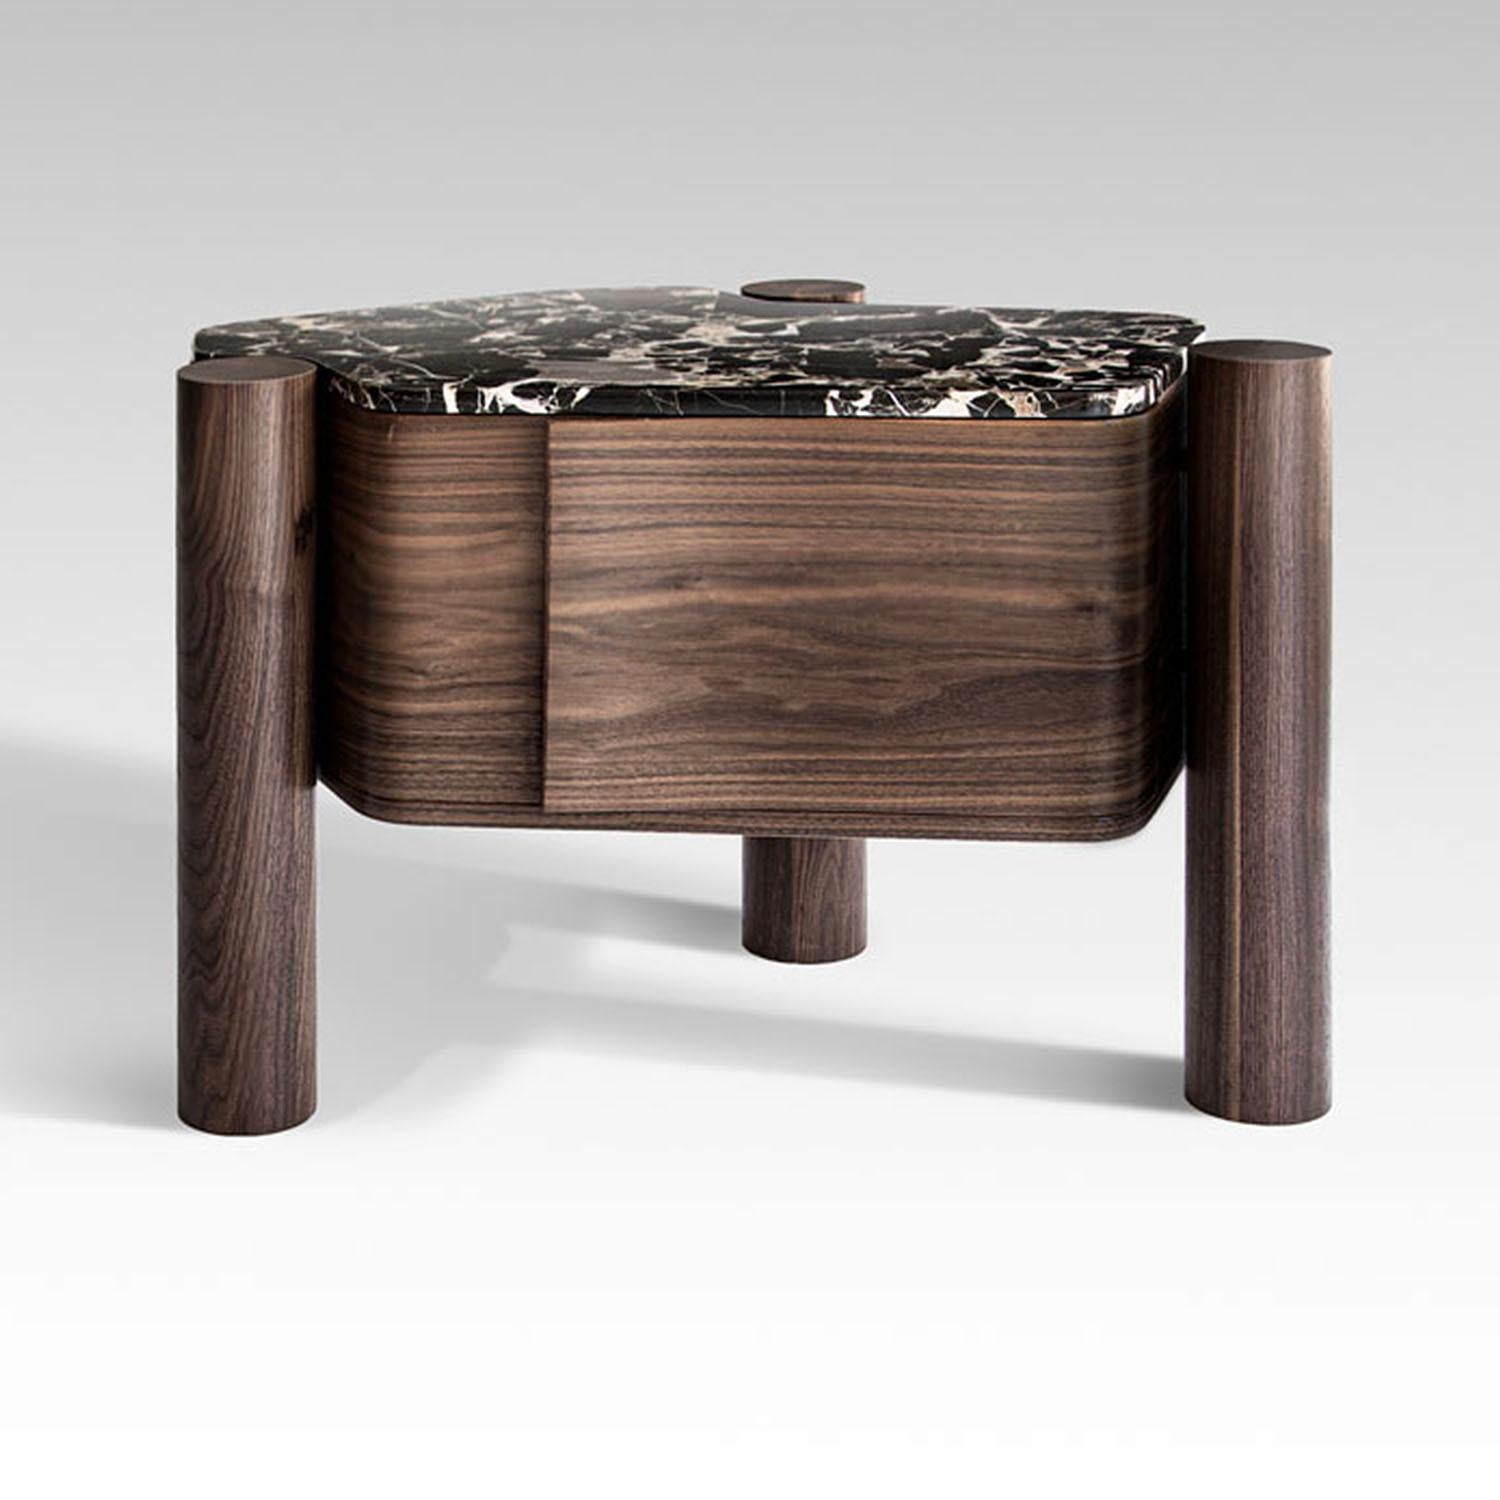 Contemporary Marble & Wood Side Table - Villa Bed Pedestal by Adam Court for Okha

Design: Adam Court

Material: Ash / Oak / Walnut Frame Options  Marble Top Options

Dimensions:
755W X 465D X 550H mm
29.7W X 18.3D X 21.7H in

Handcrafted in